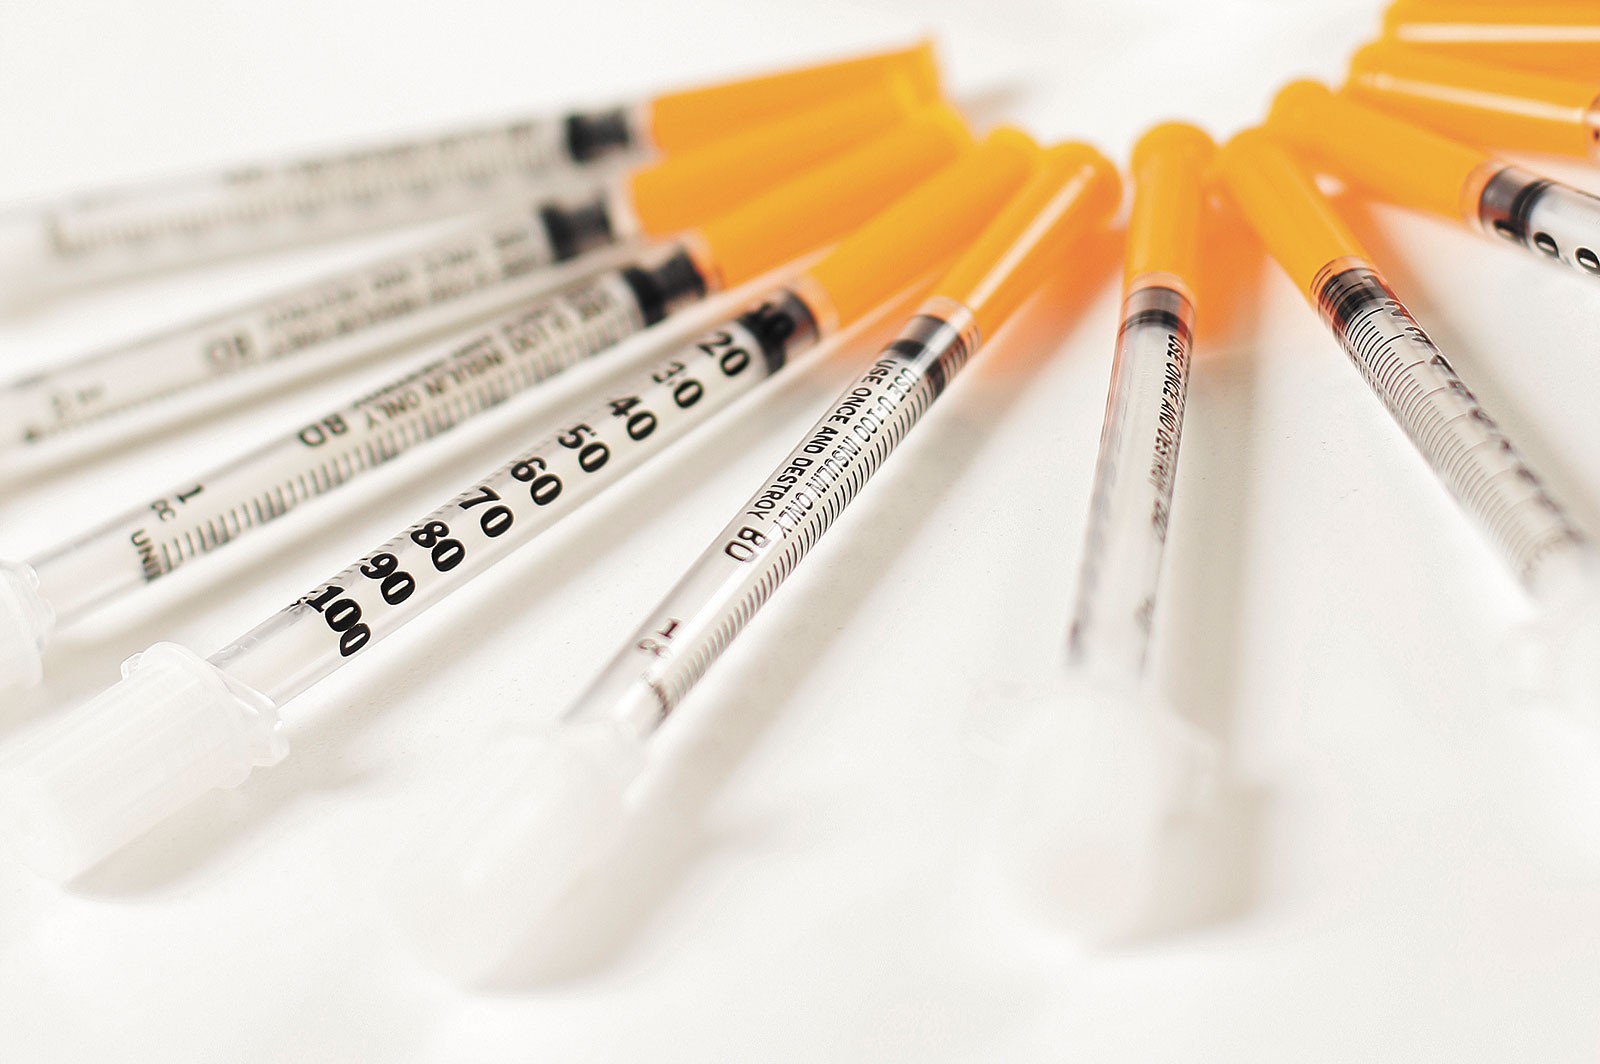 Spokane Regional Health District's needle exchange program seeks to reduce the spread of illness by allowing drug users to swap out dirty syringes for clean ones. - YOUNG KWAK